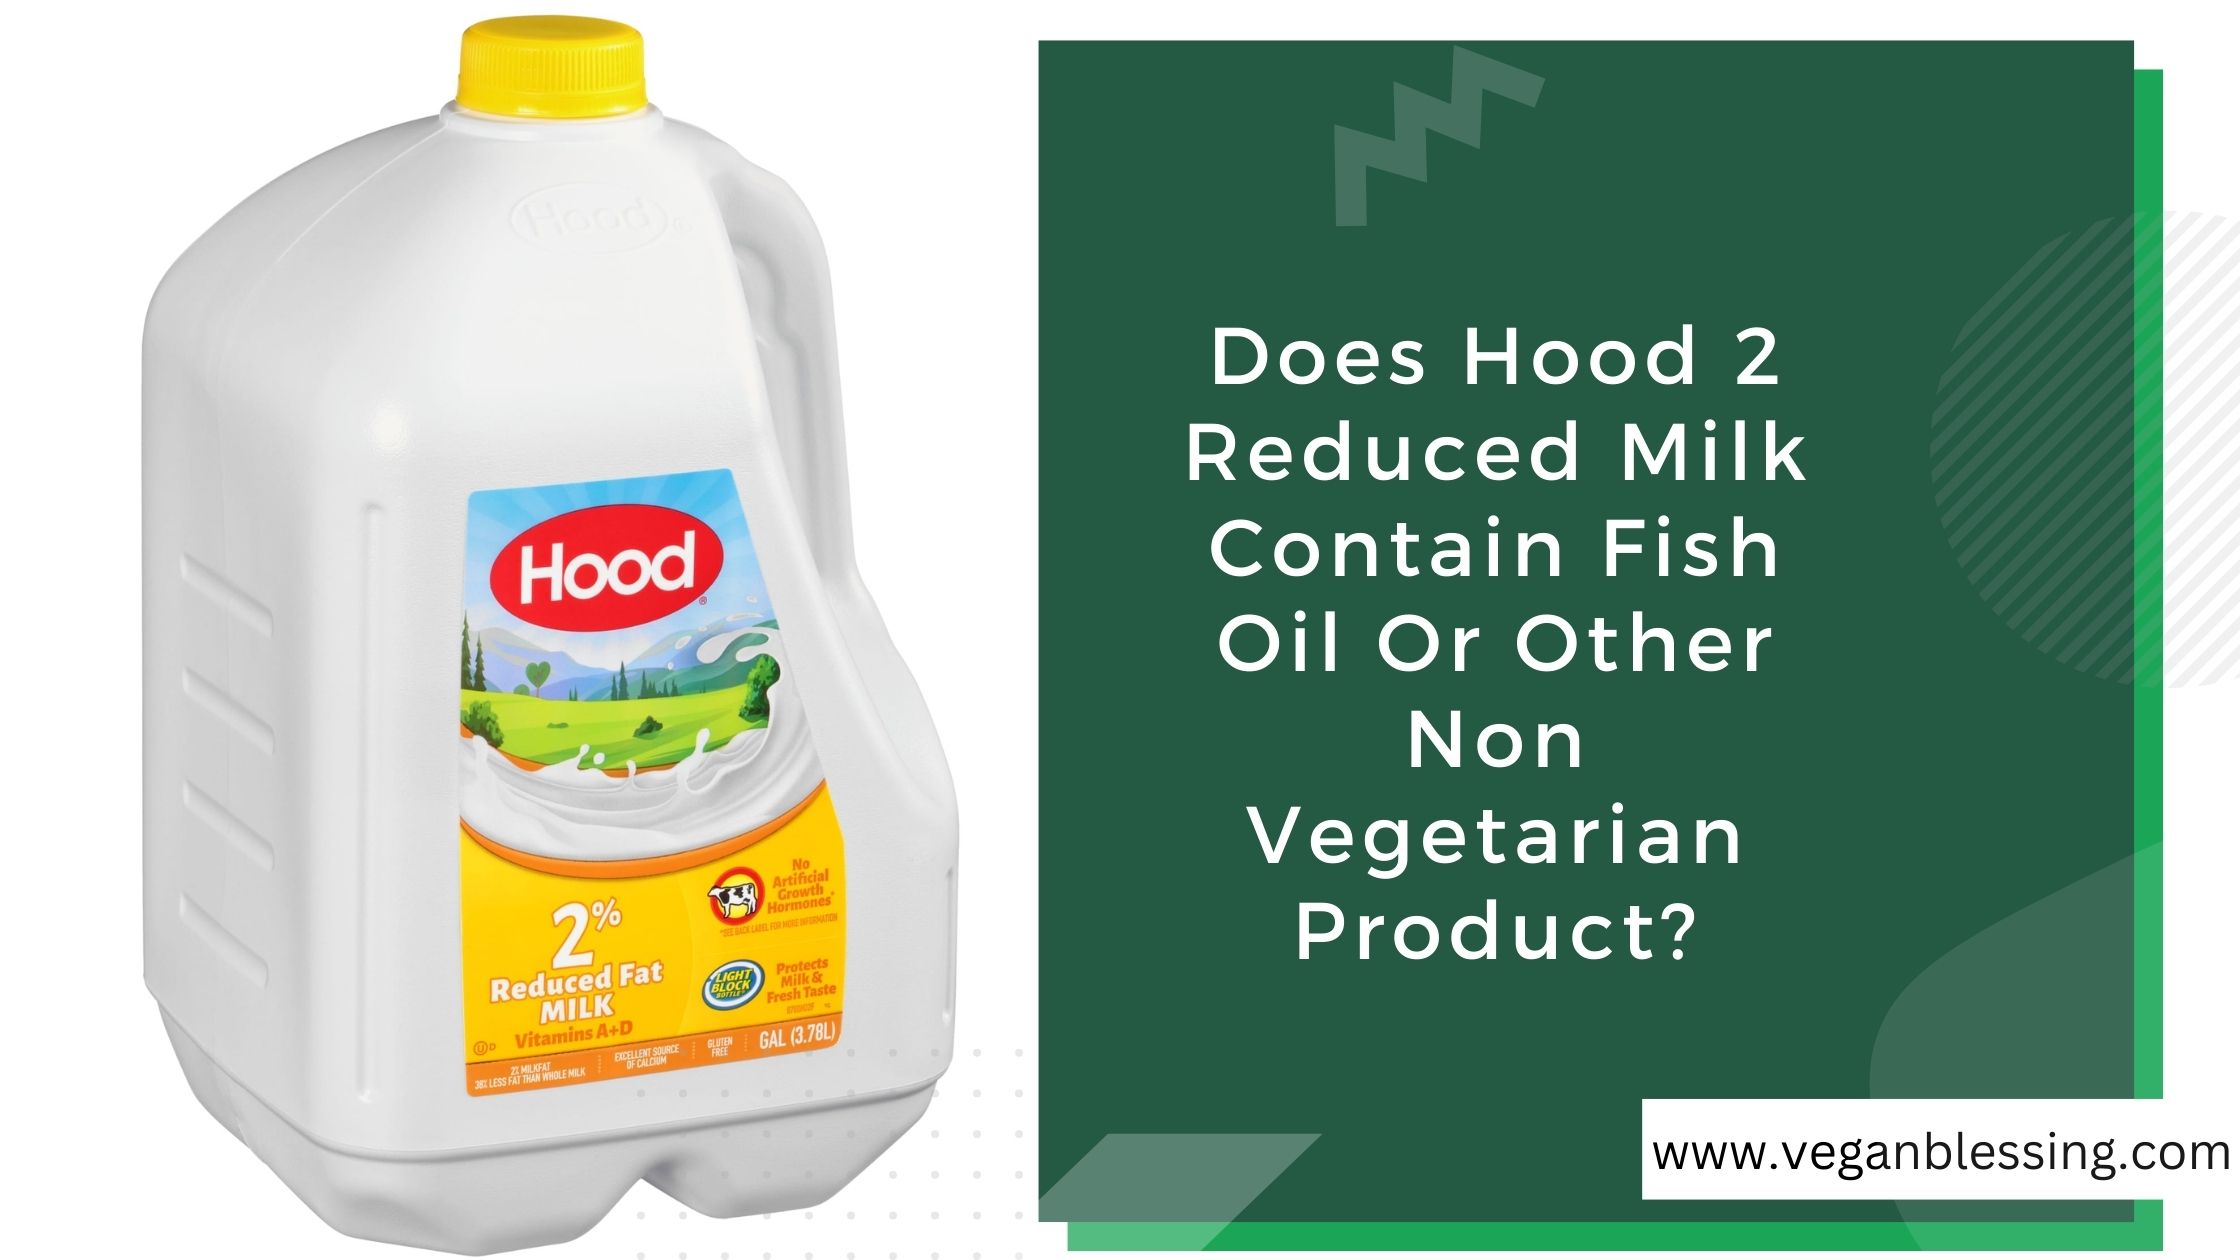 Does Hood 2 Reduced Milk Contain Fish Oil or Other Non-Vegetarian Product? Does Hood 2 Reduced Milk Contain Fish Oil Or Other Non Vegetarian Product